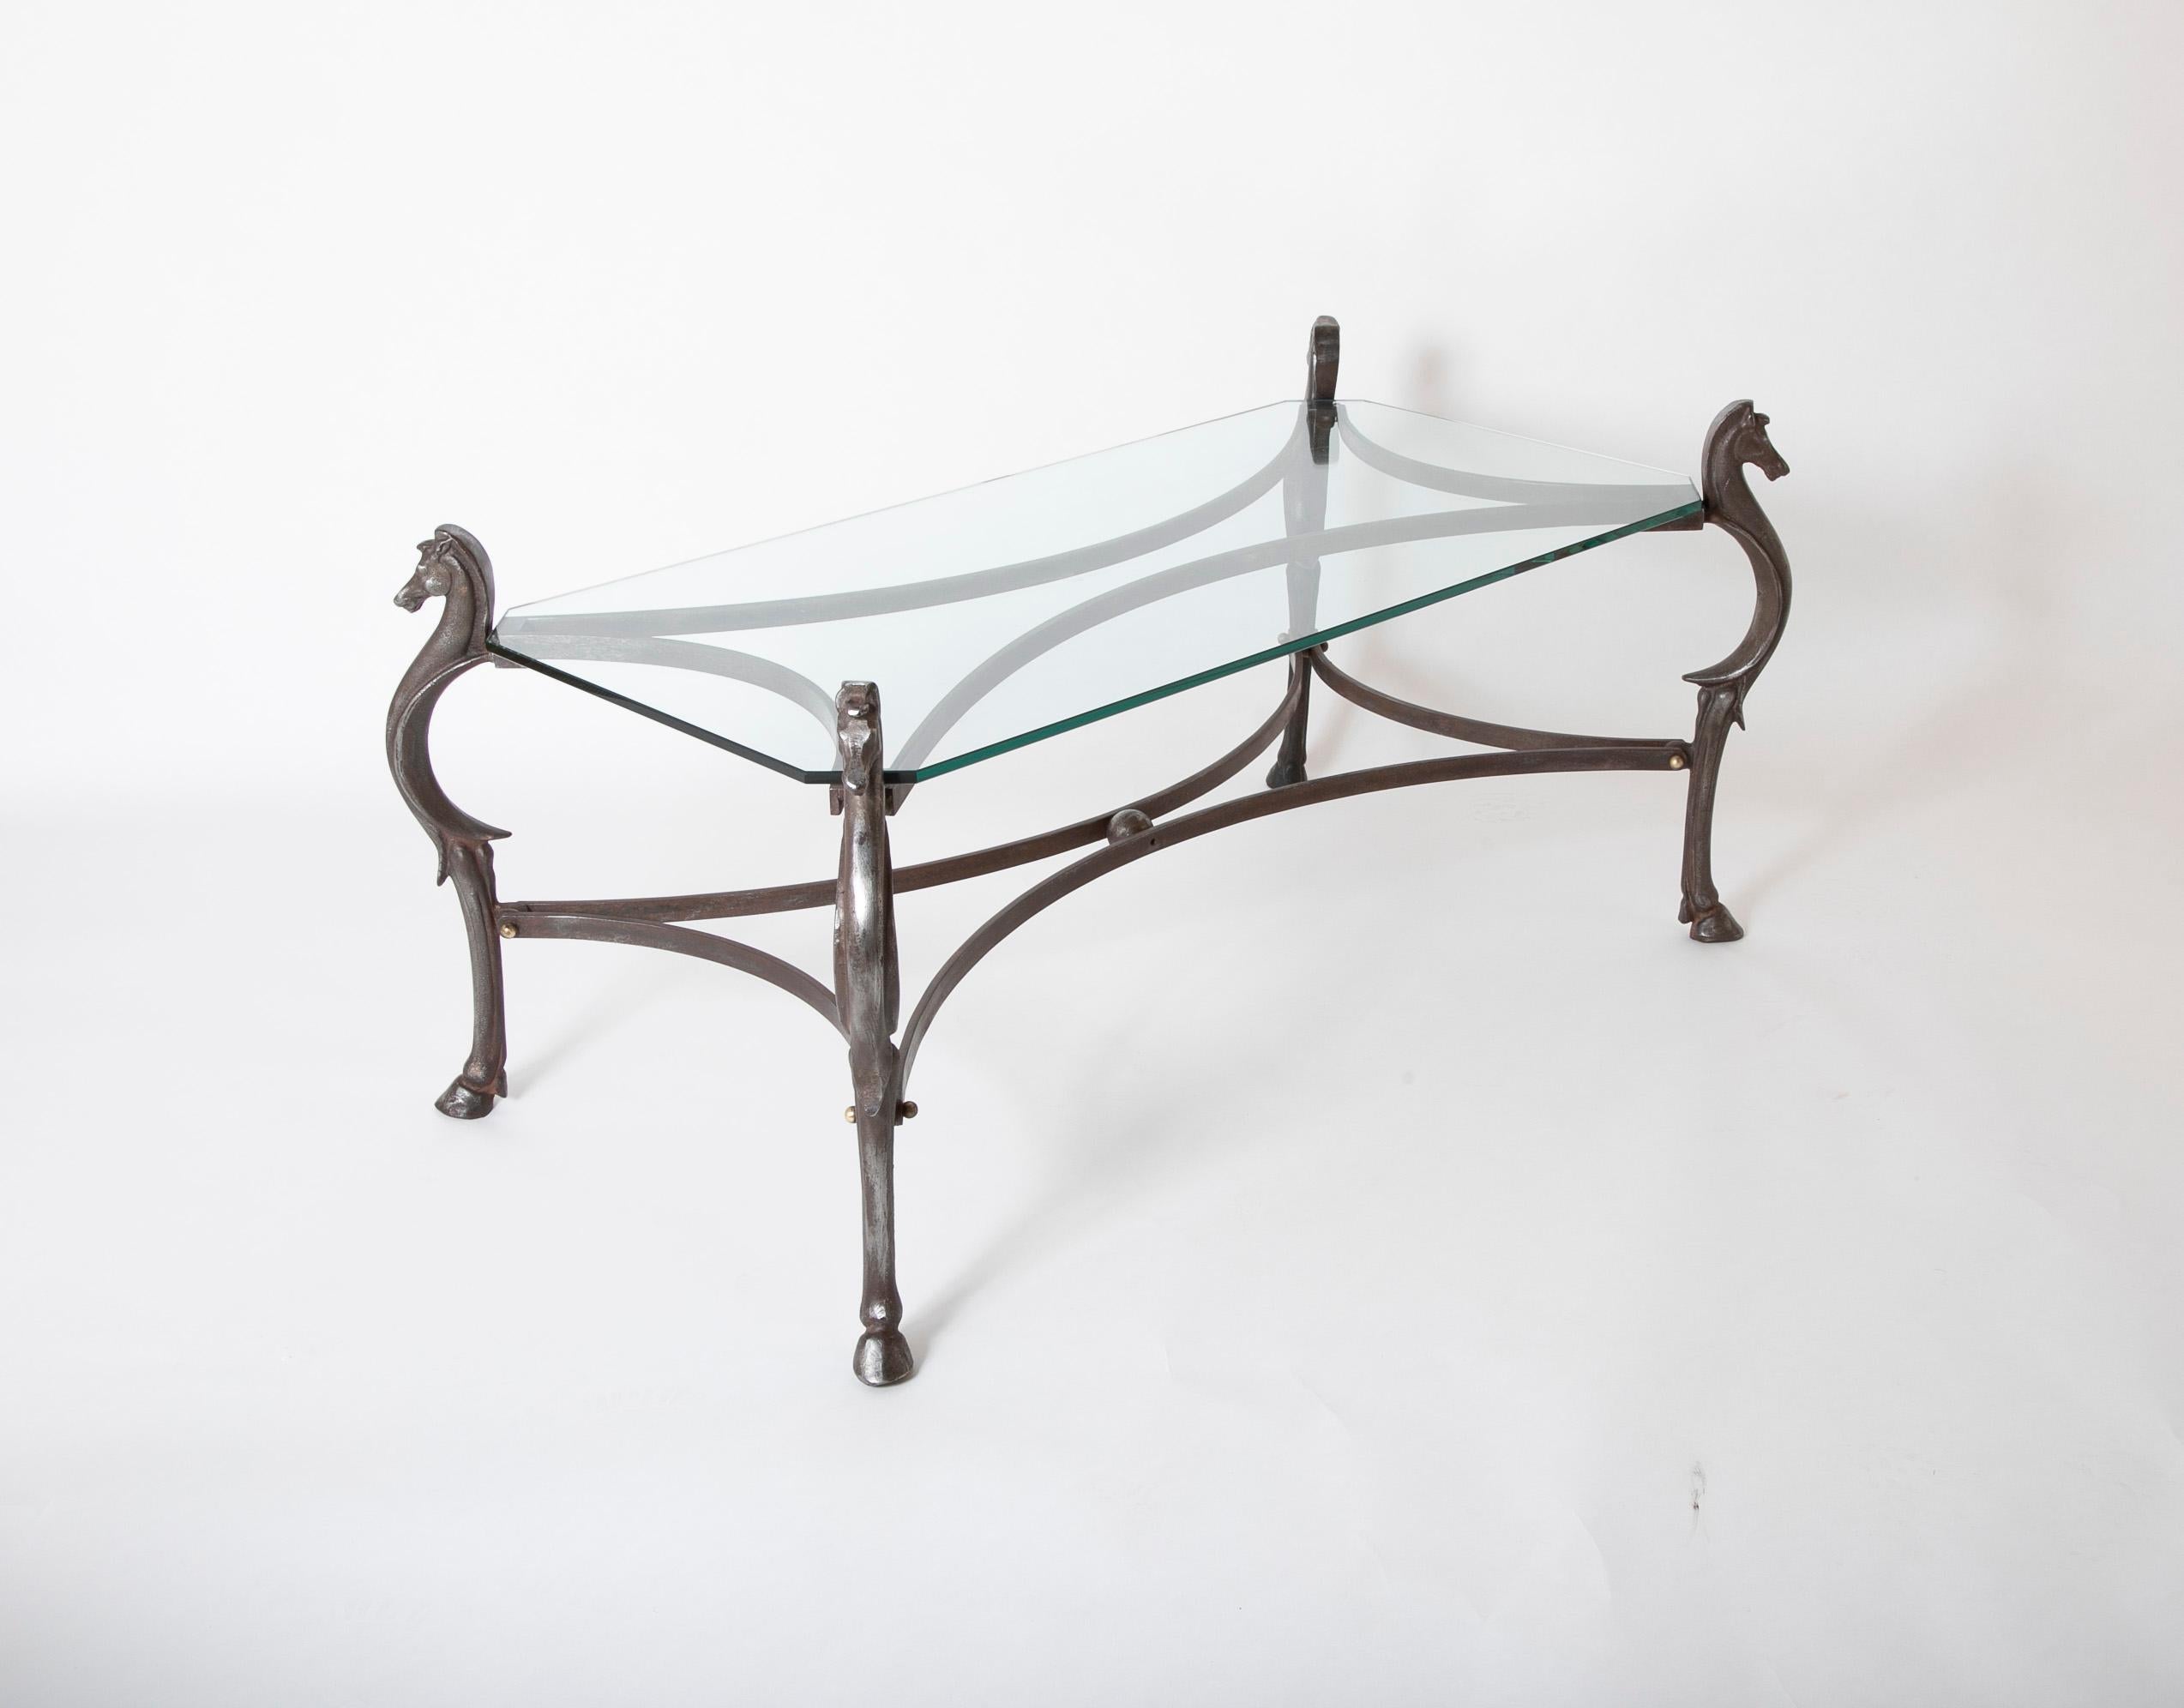 Fantastic Italian iron and glass coffee table with four supports in the form of a horse legs topped by horse heads in a beautifully realized design. All joined by two sets of curving stretchers joined by brass ball terminals. Wonderful patina. Circa